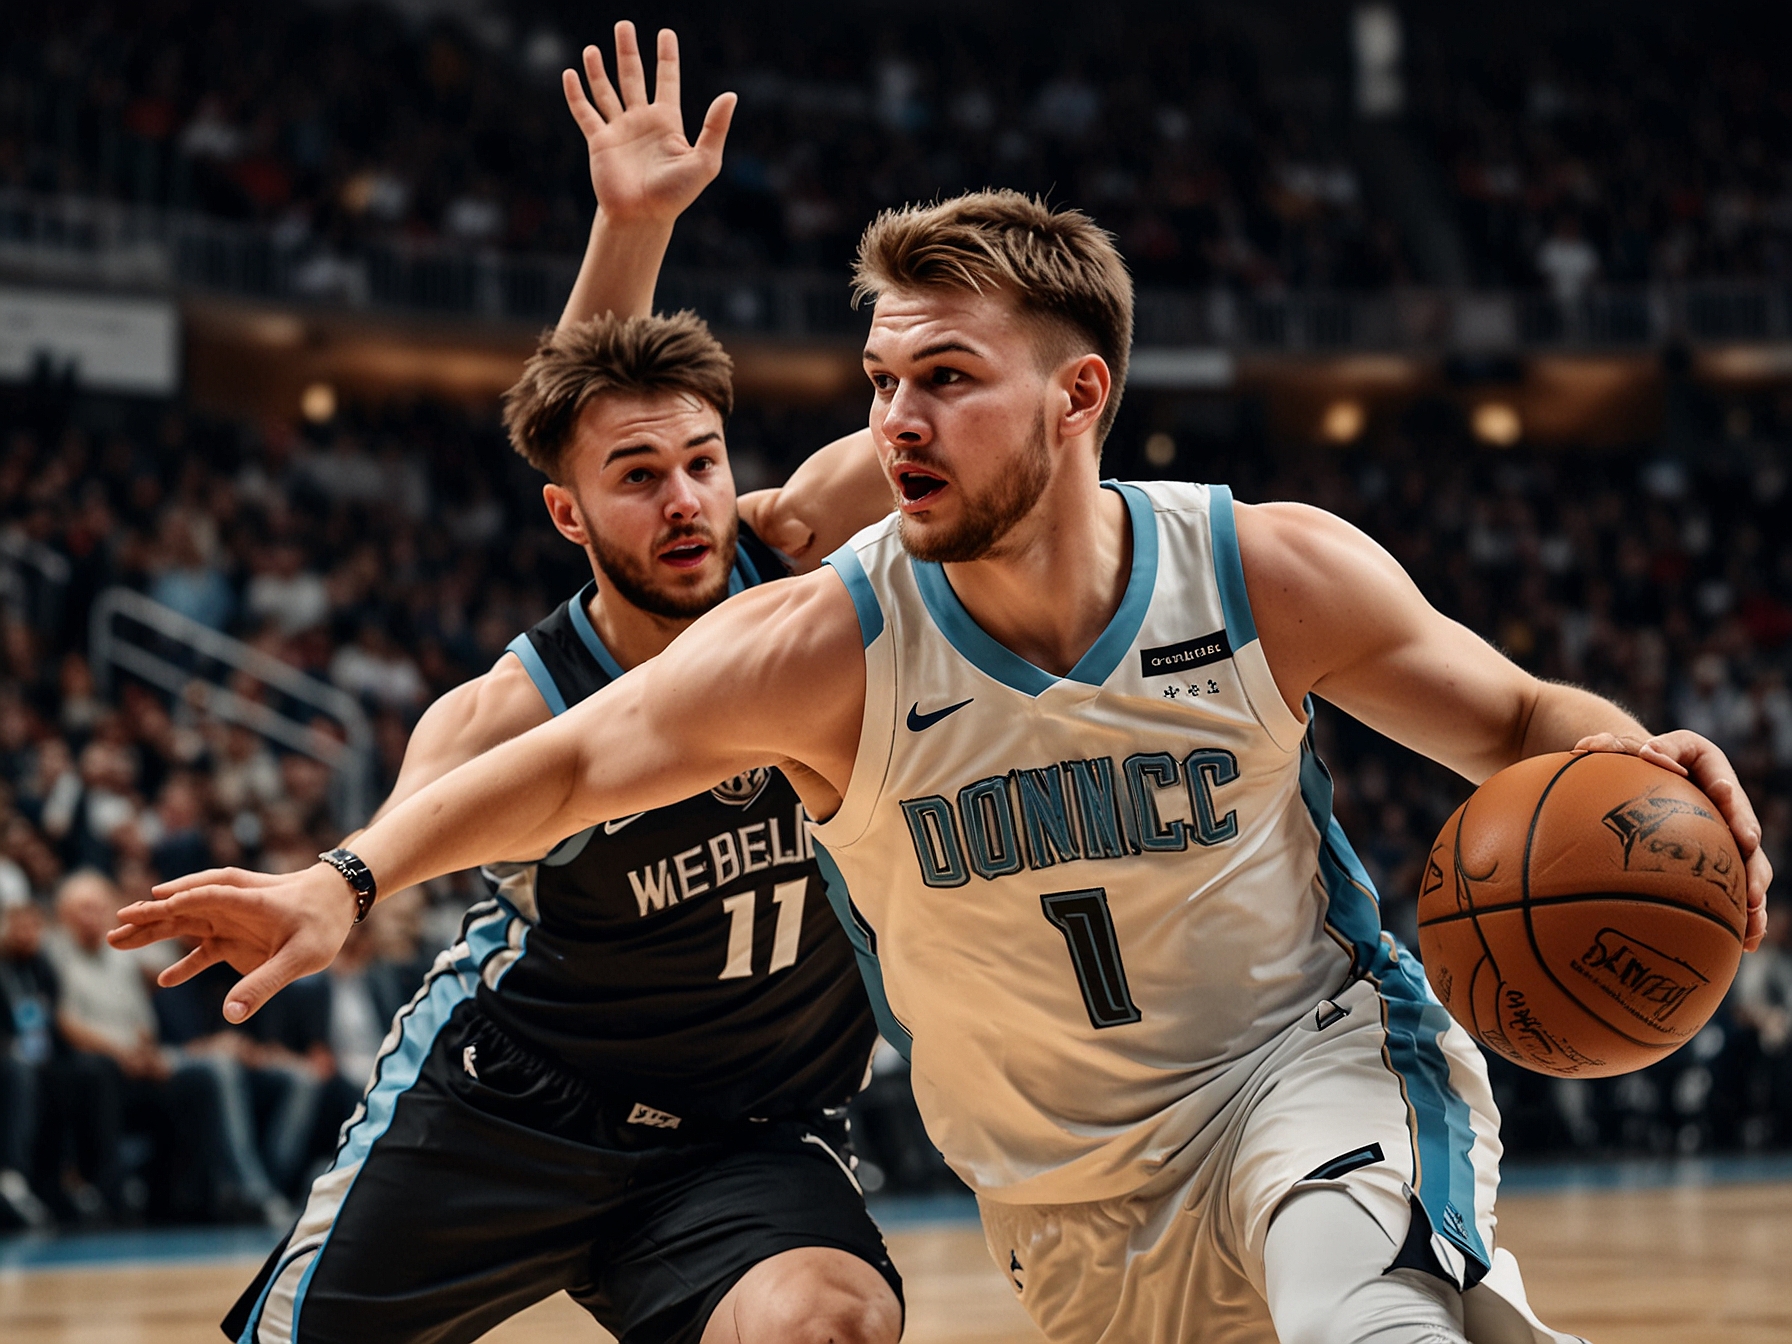 Luka Doncic struggling defensively while trying to block an opposing player during a game.